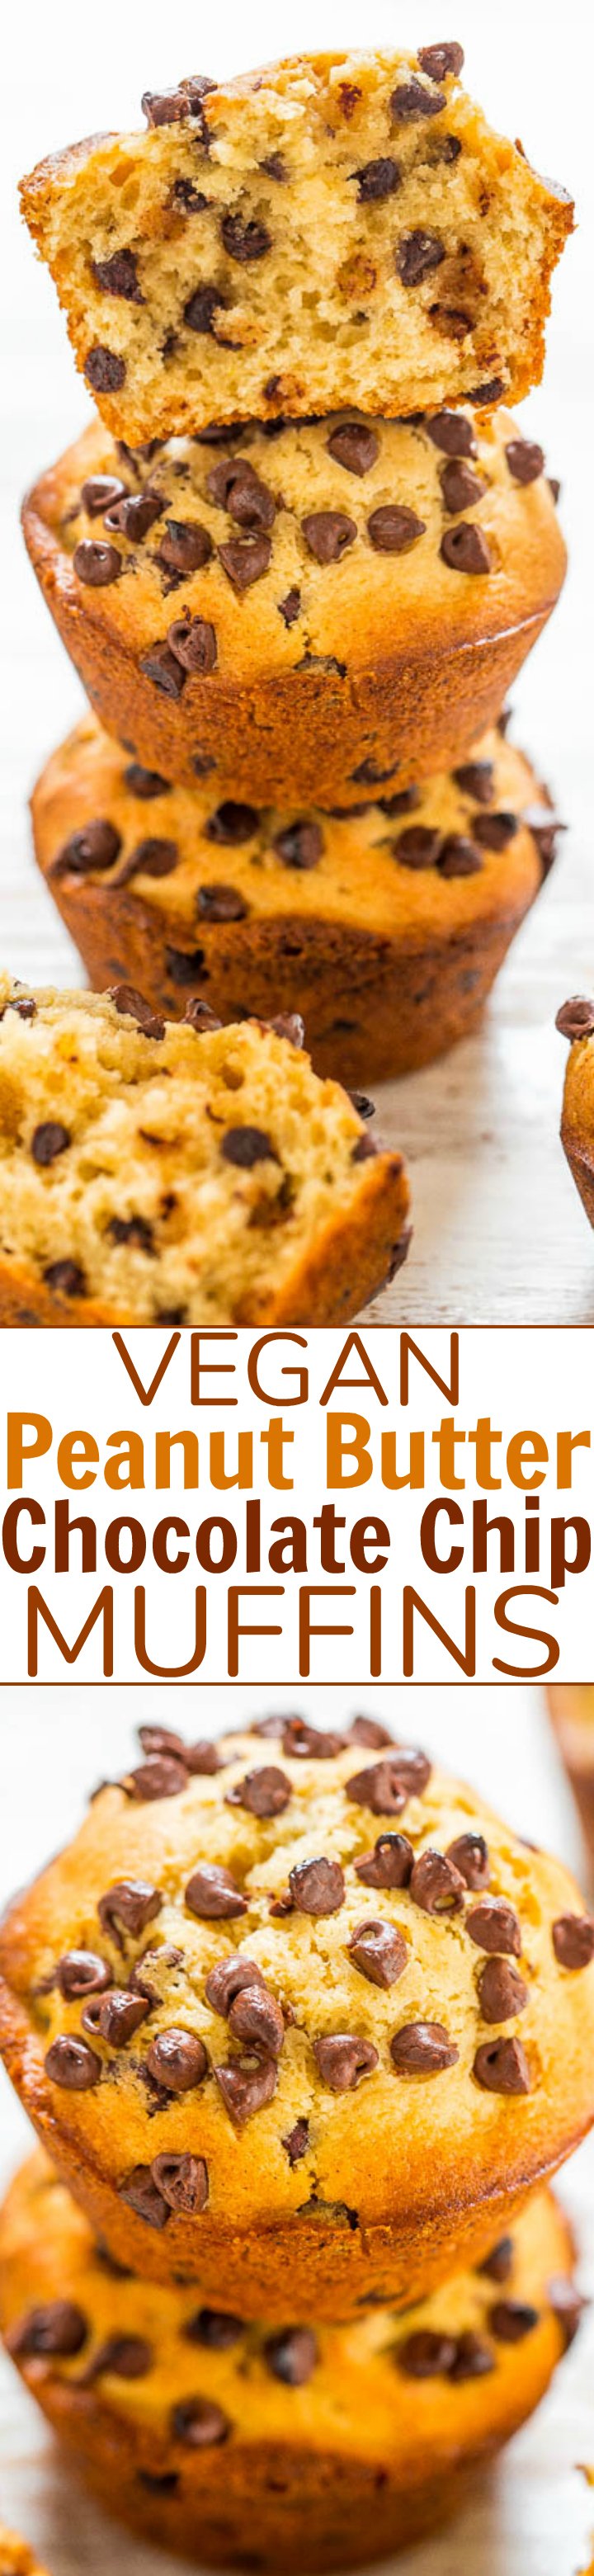 Vegan Peanut Butter Chocolate Chip Muffins - Fast, EASY, one bowl, no mixer muffins!! You'd never guess they were vegan! Soft, fluffy, full of PEANUT BUTTER flavor, and LOADED with CHOCOLATE in every bite!!